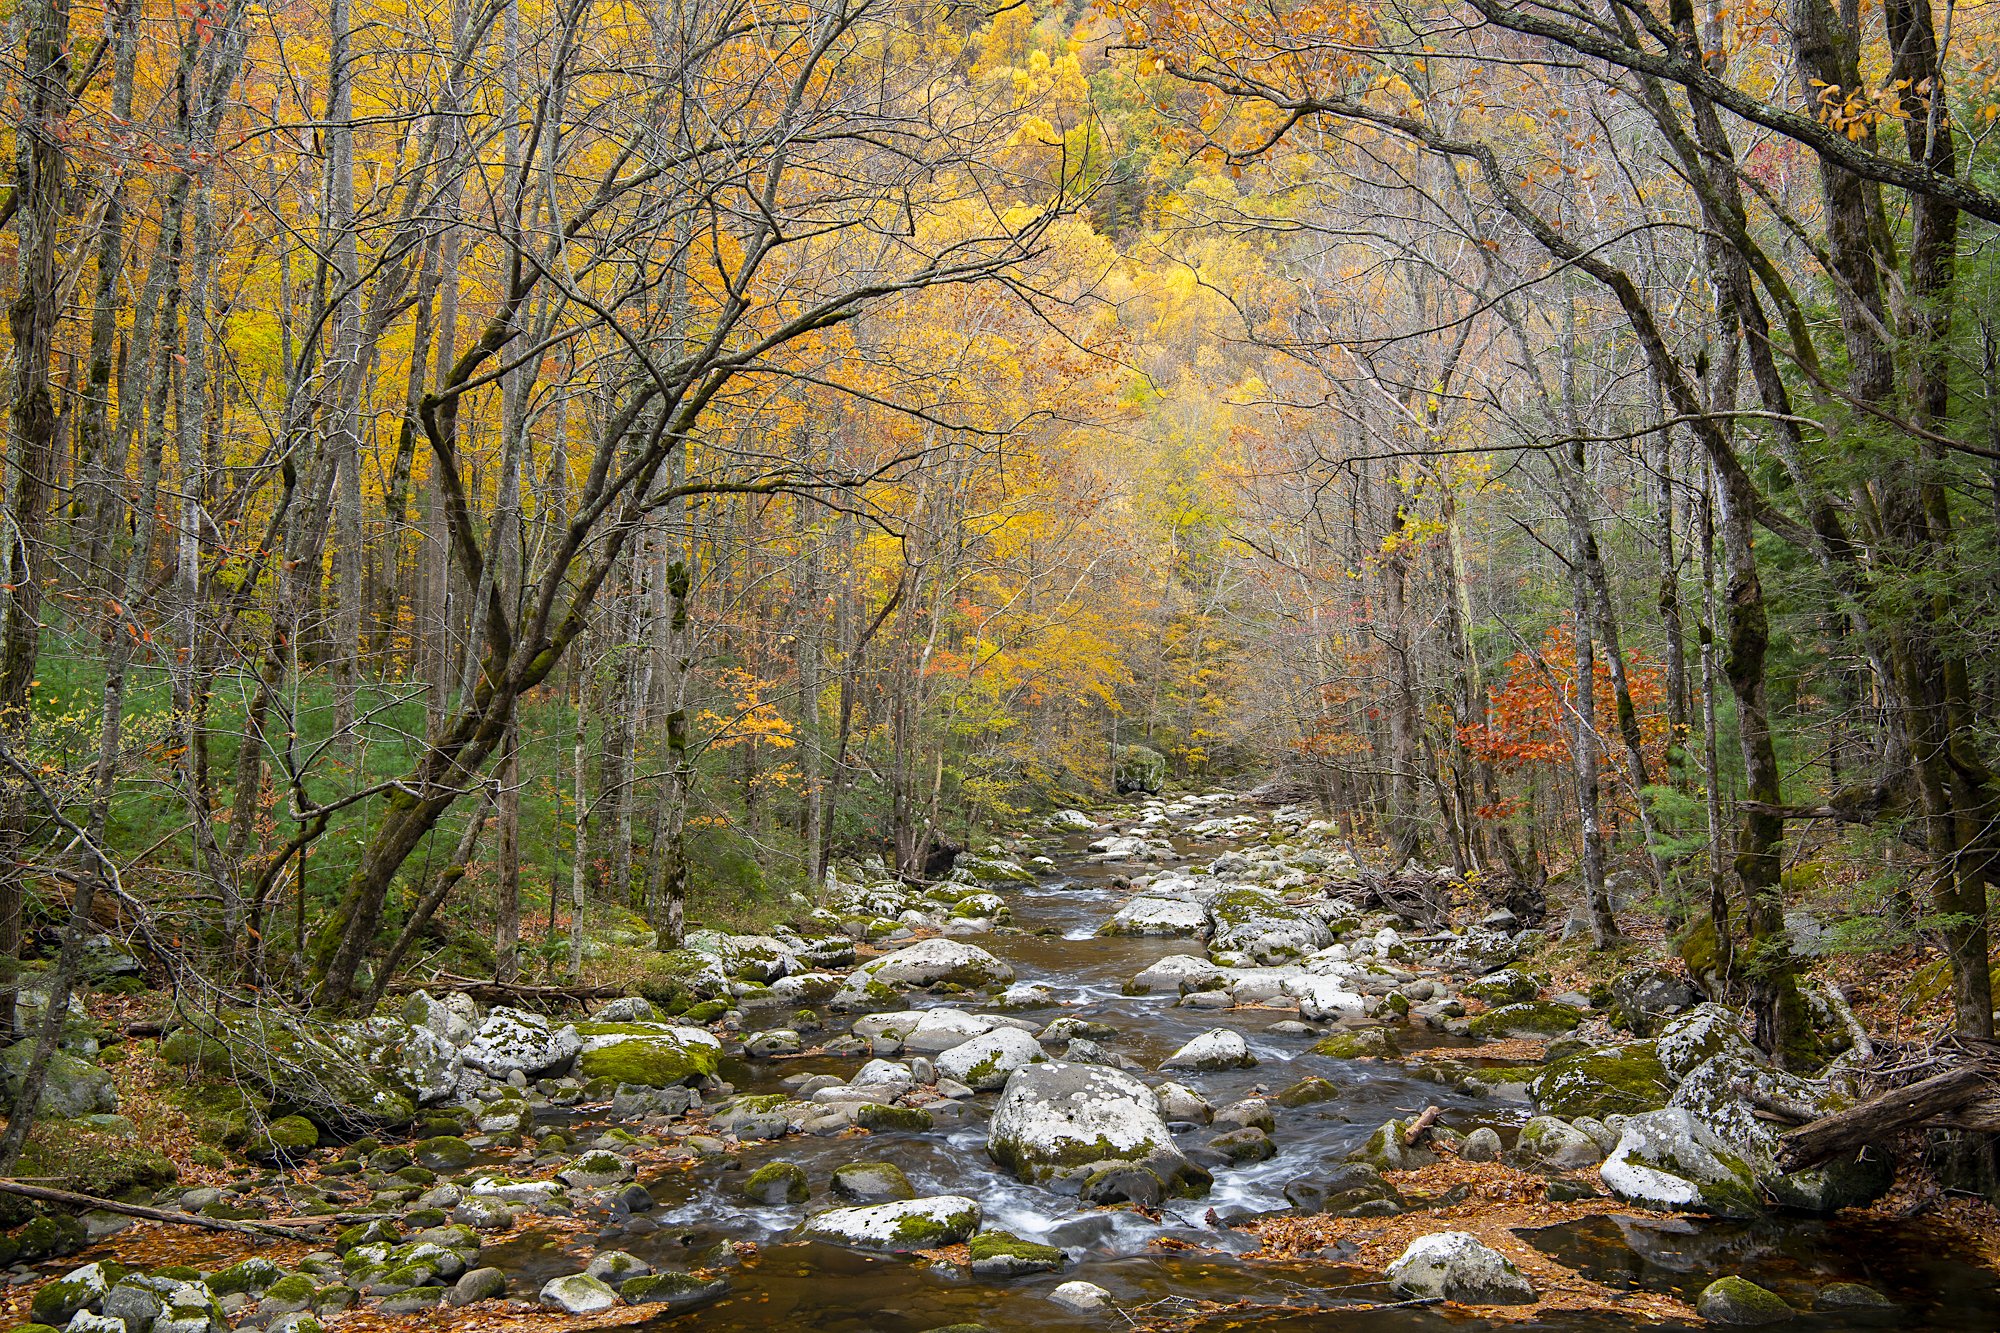 Stream and fall colors